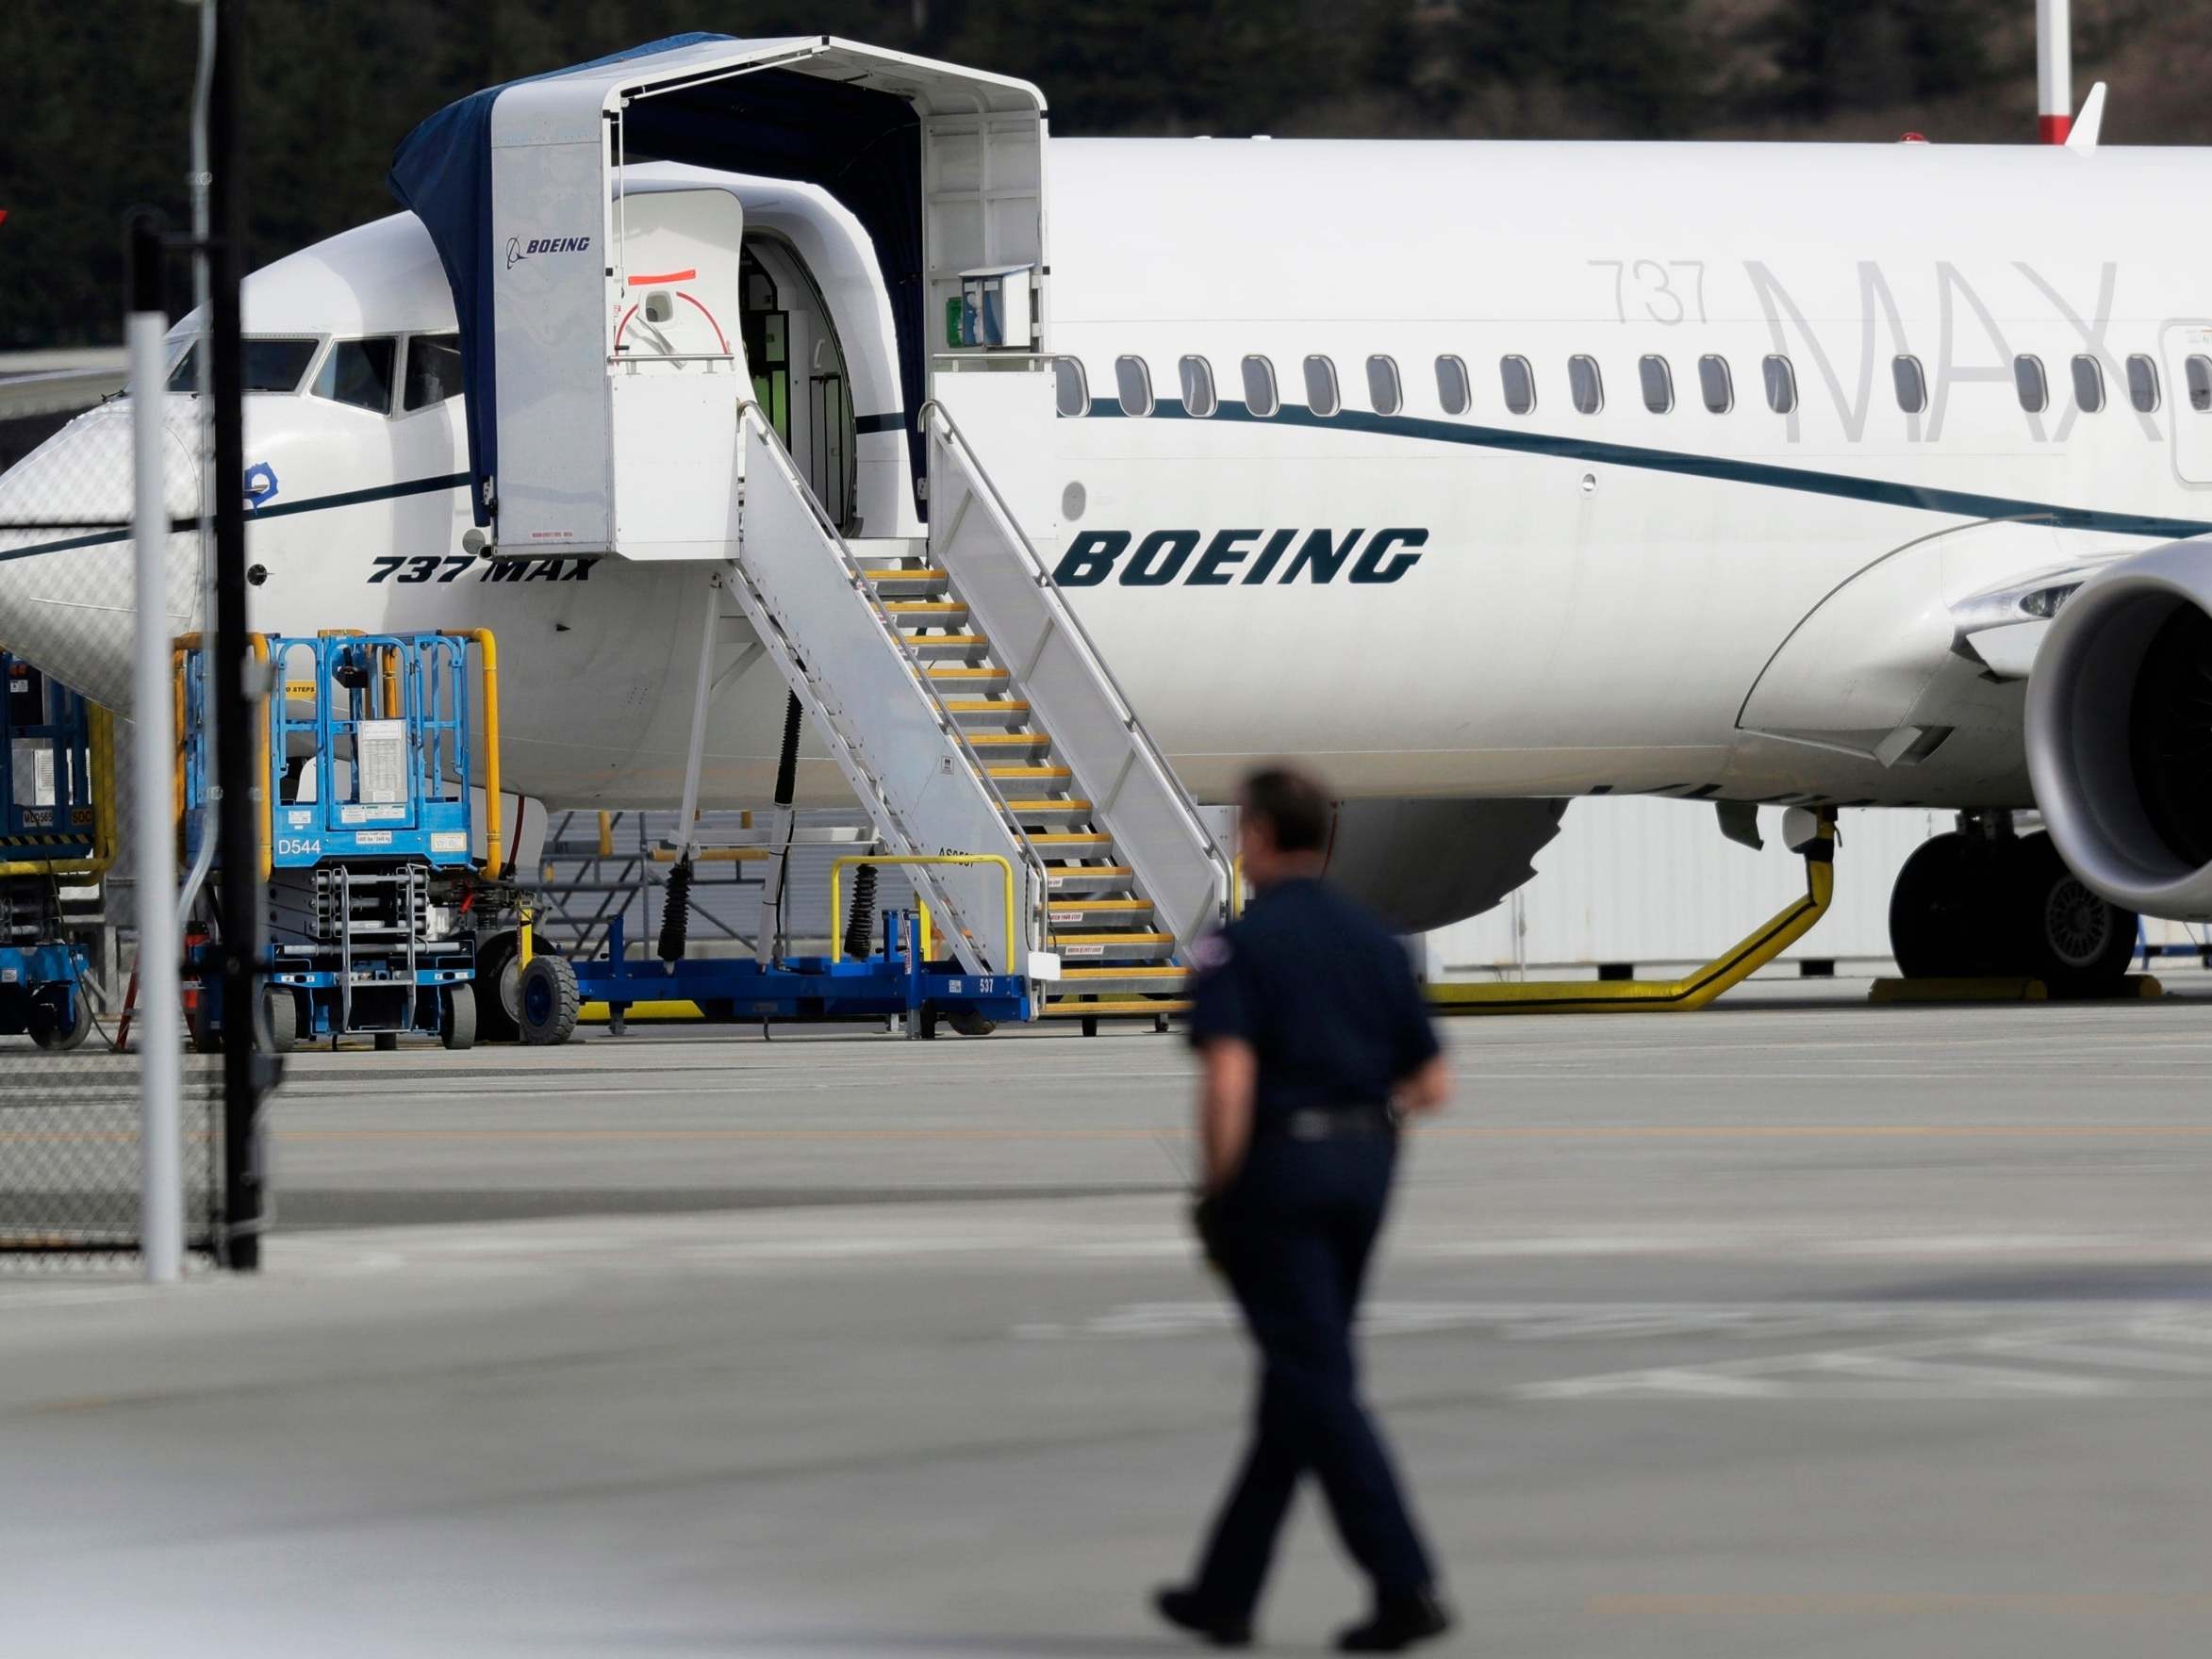 Full stop: hundreds of Boeing 737 Max jets are grounded worldwide